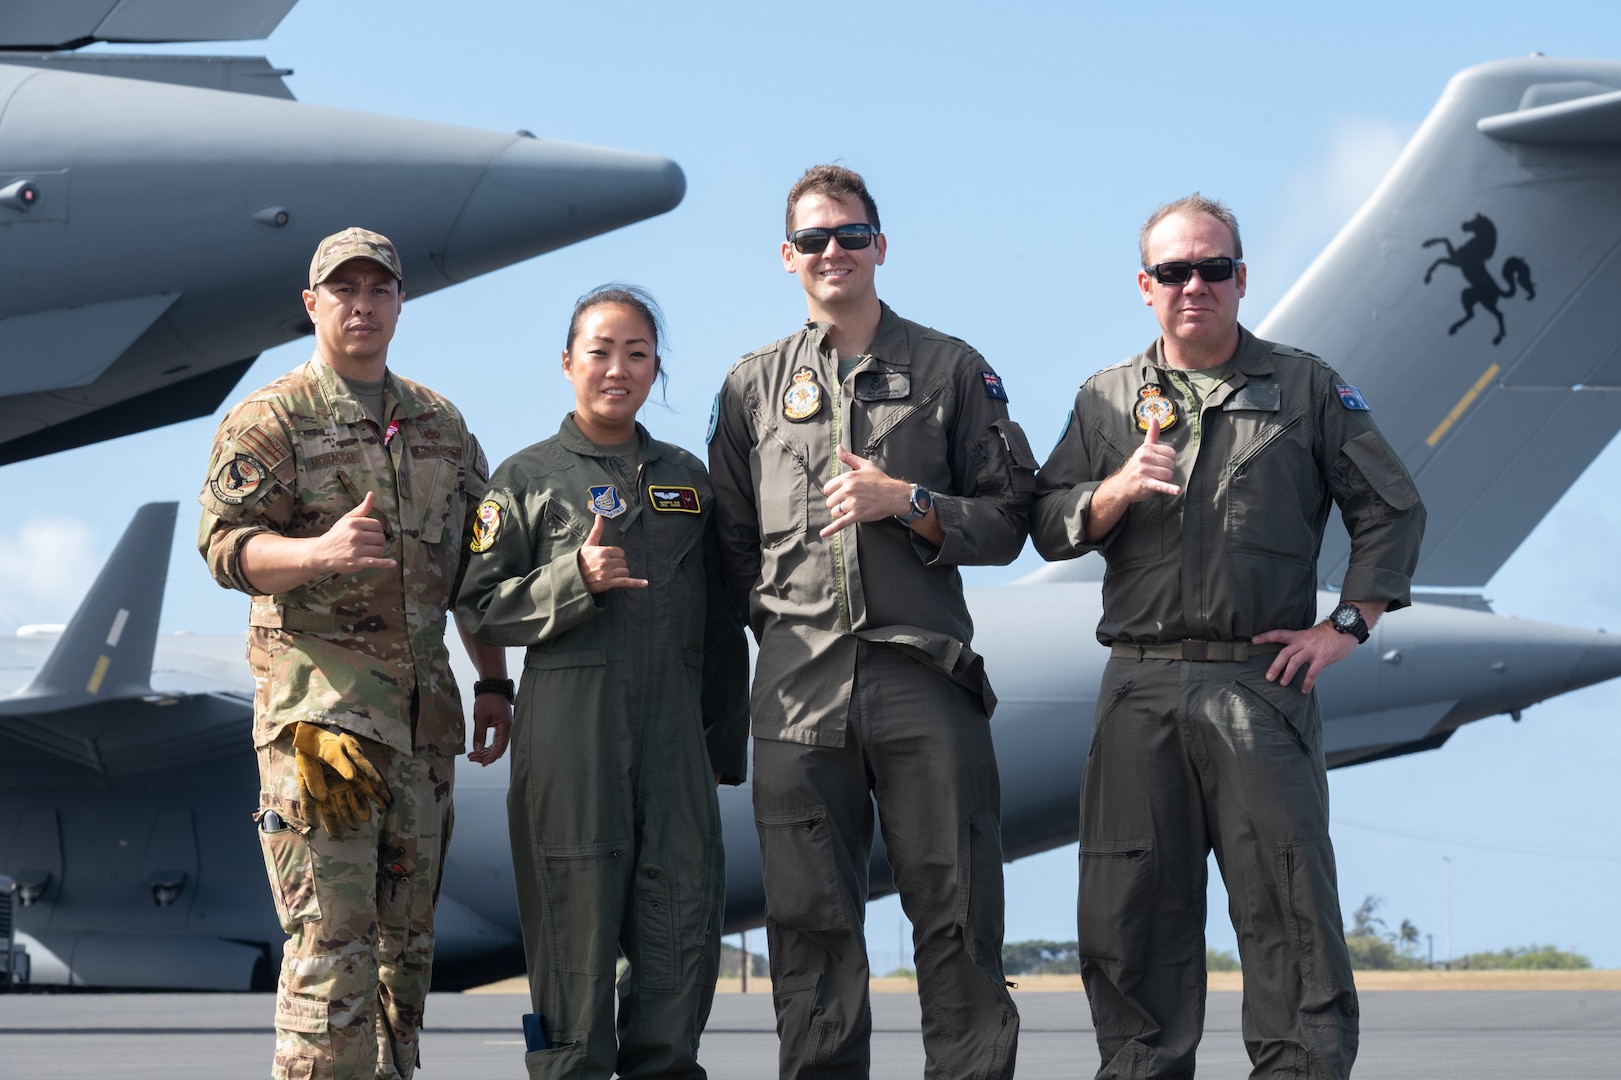 U.S. Air Force loadmasters from the 204th Airlift Squadron, Tech. Sgt. Josh Moracco and Senior Airman Sandra Kim, and Royal Australian Air Force loadmasters from 87 Squadron, Sgt. Ben Russell and Flt Sgt. Jay Johnson, gather May 12, 2022, at Joint Base Pearl Harbor-Hickam, Hawaii. Aircrew members from each nation shared responsibilities on one another’s aircraft throughout training exercise Global Dexterity.